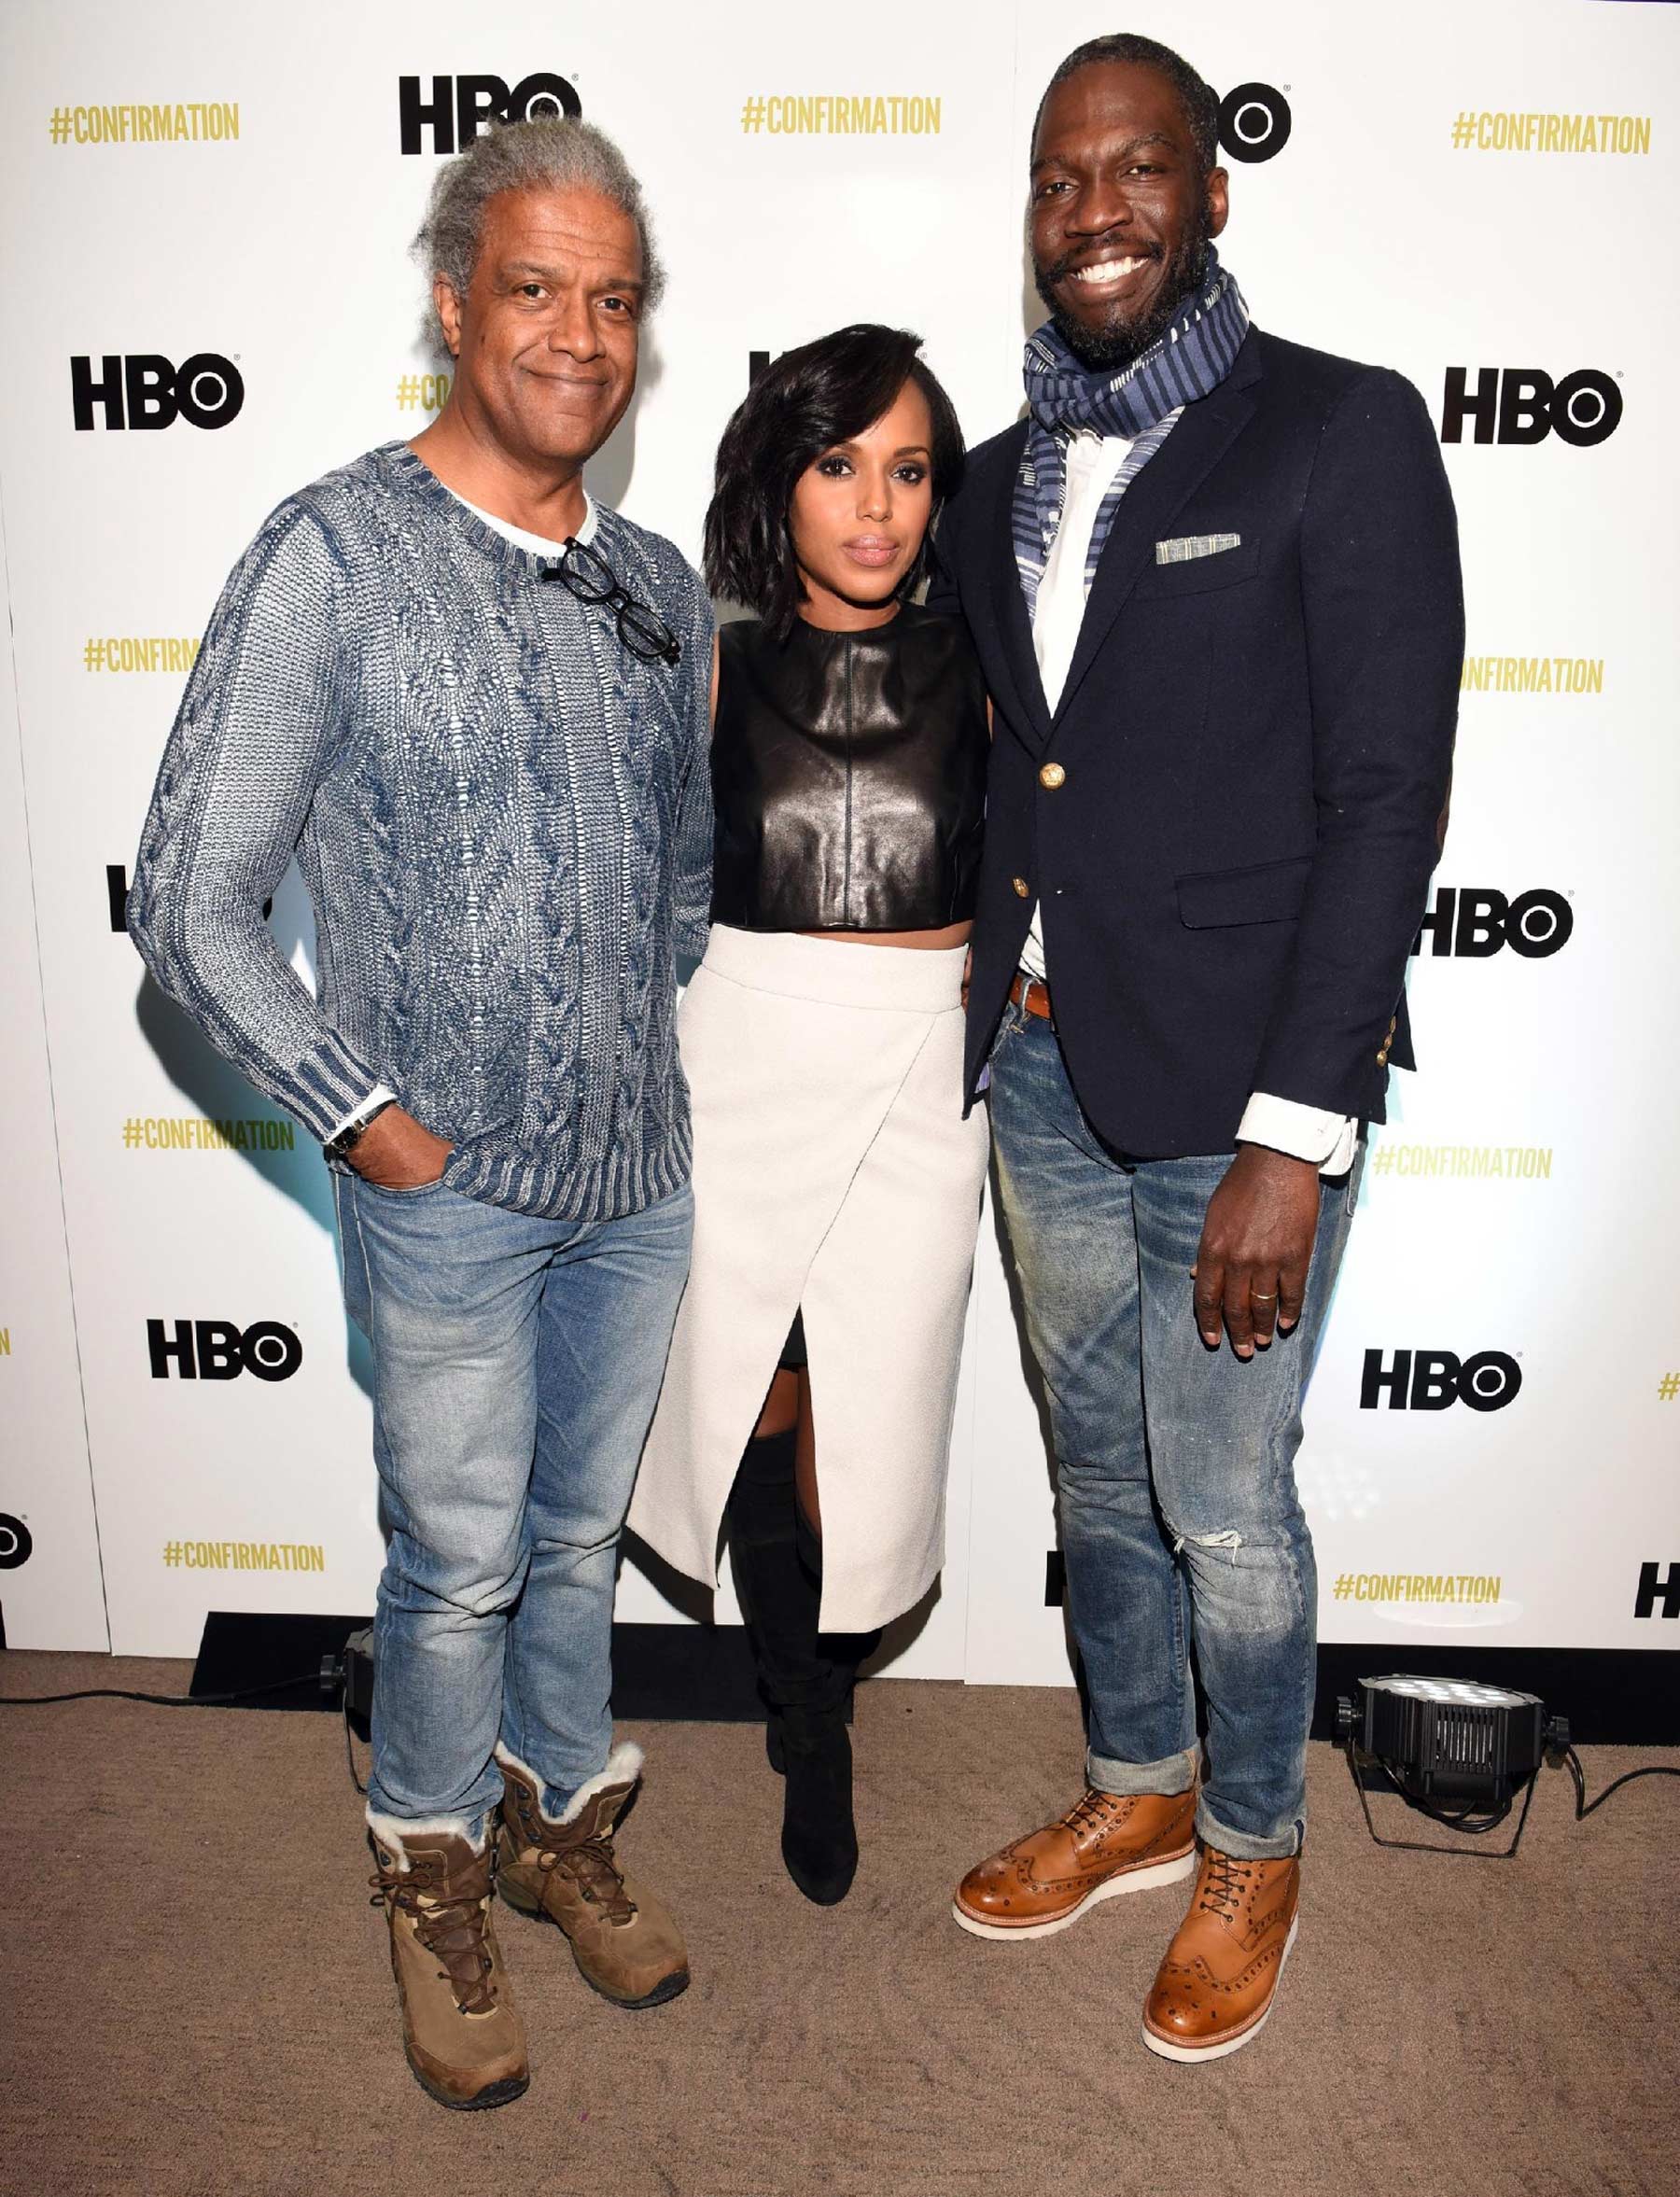 Kerry Washington attends HBO’s Confirmation